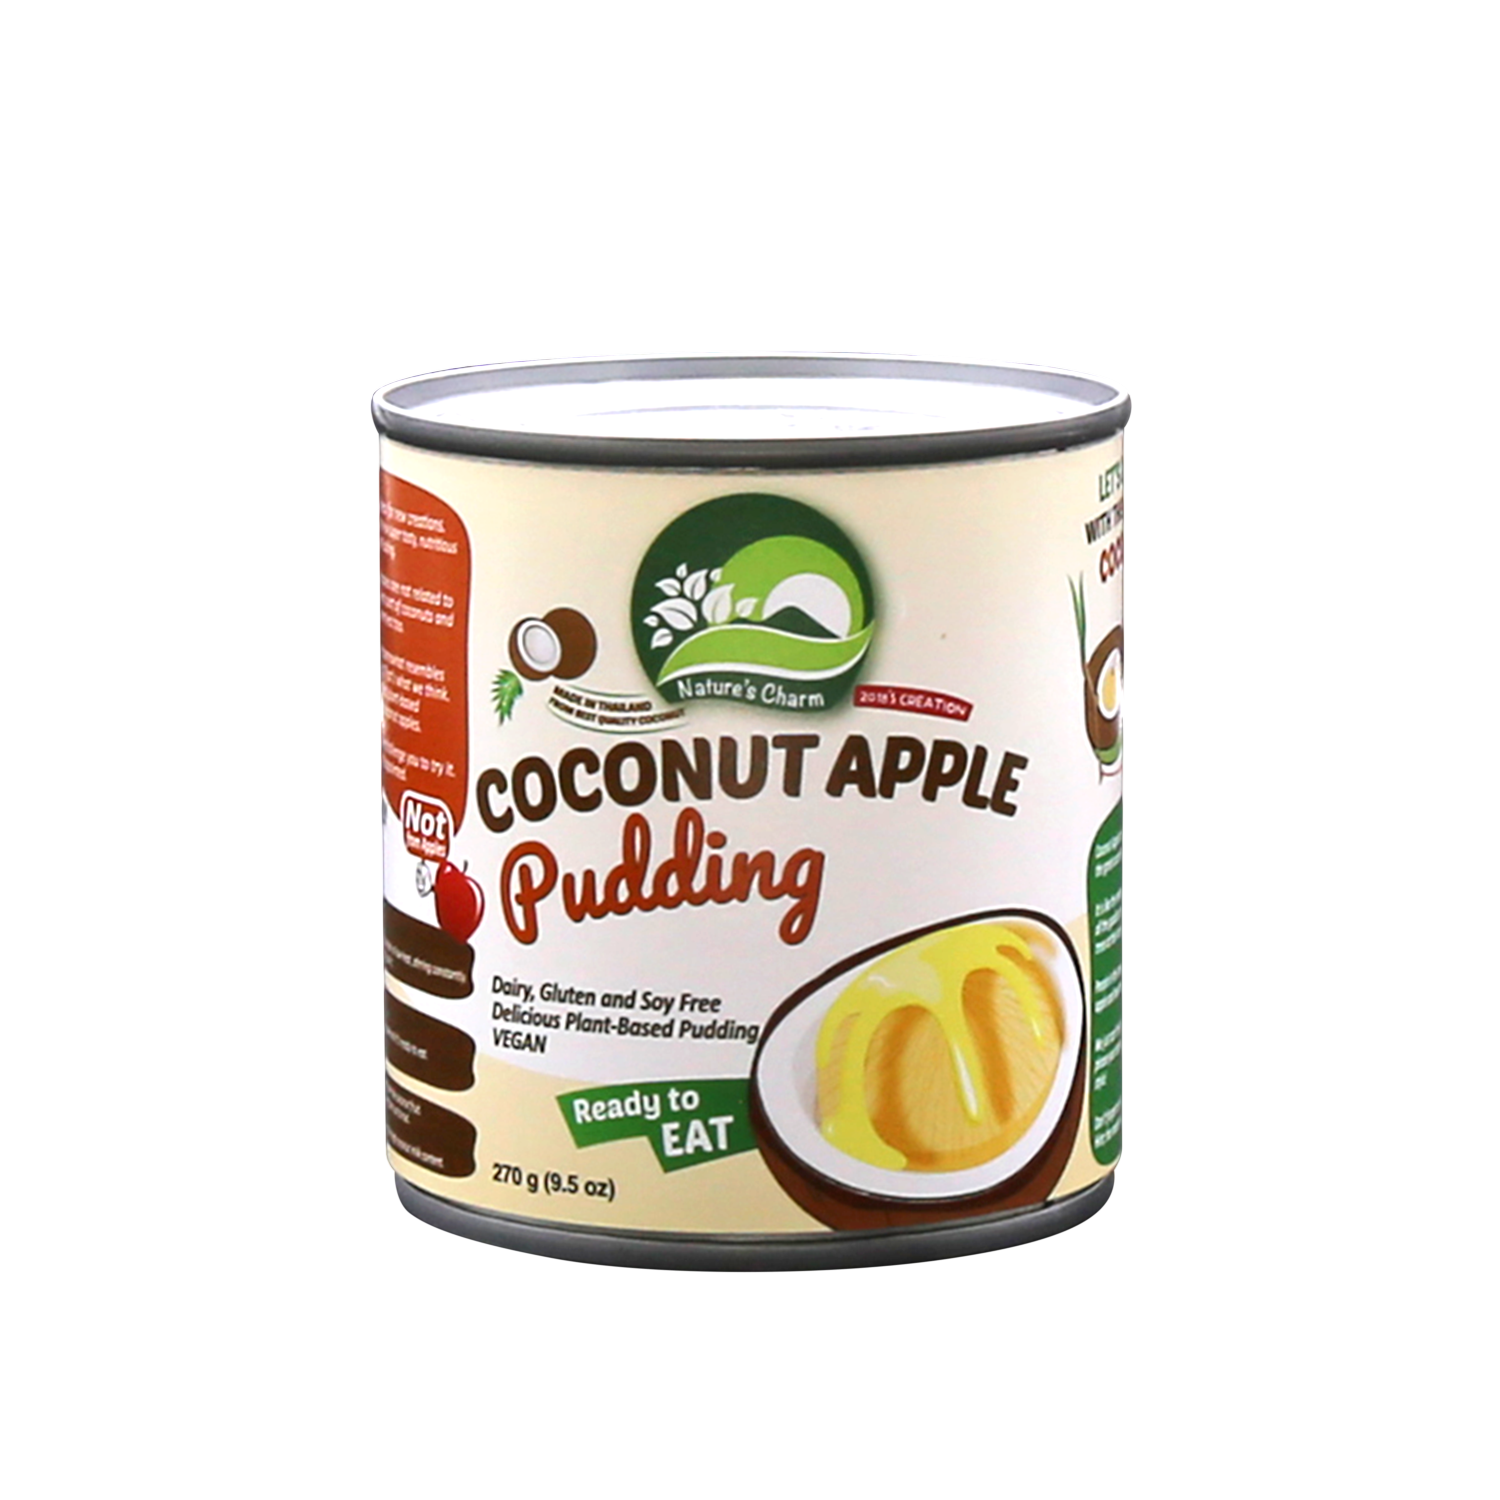 Picture of Nature's Charm Coconut Apple Pudding 270g